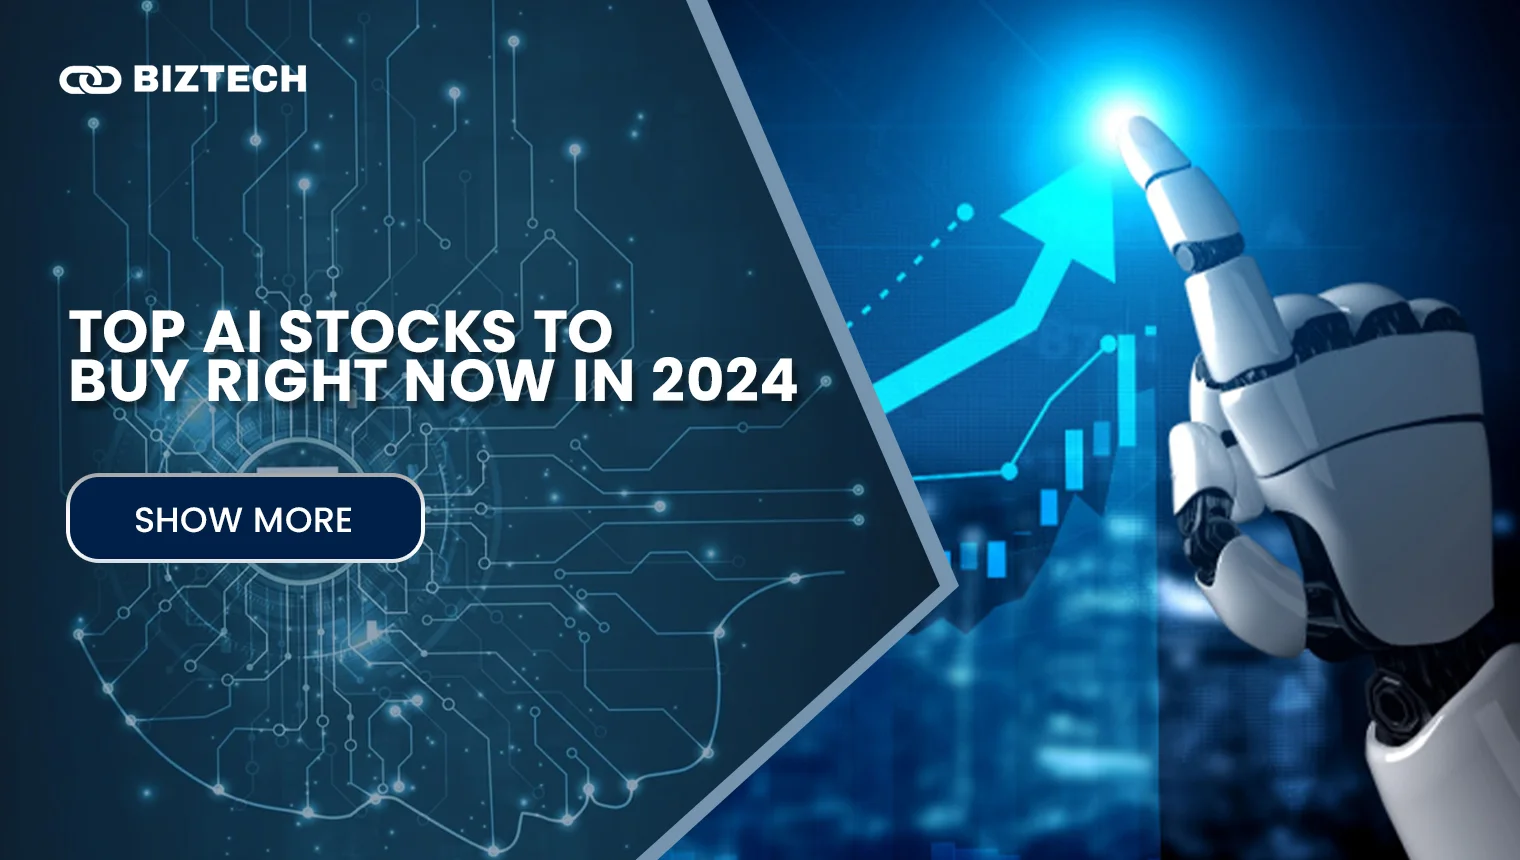 Top AI Stocks to Buy Right Now in 2024